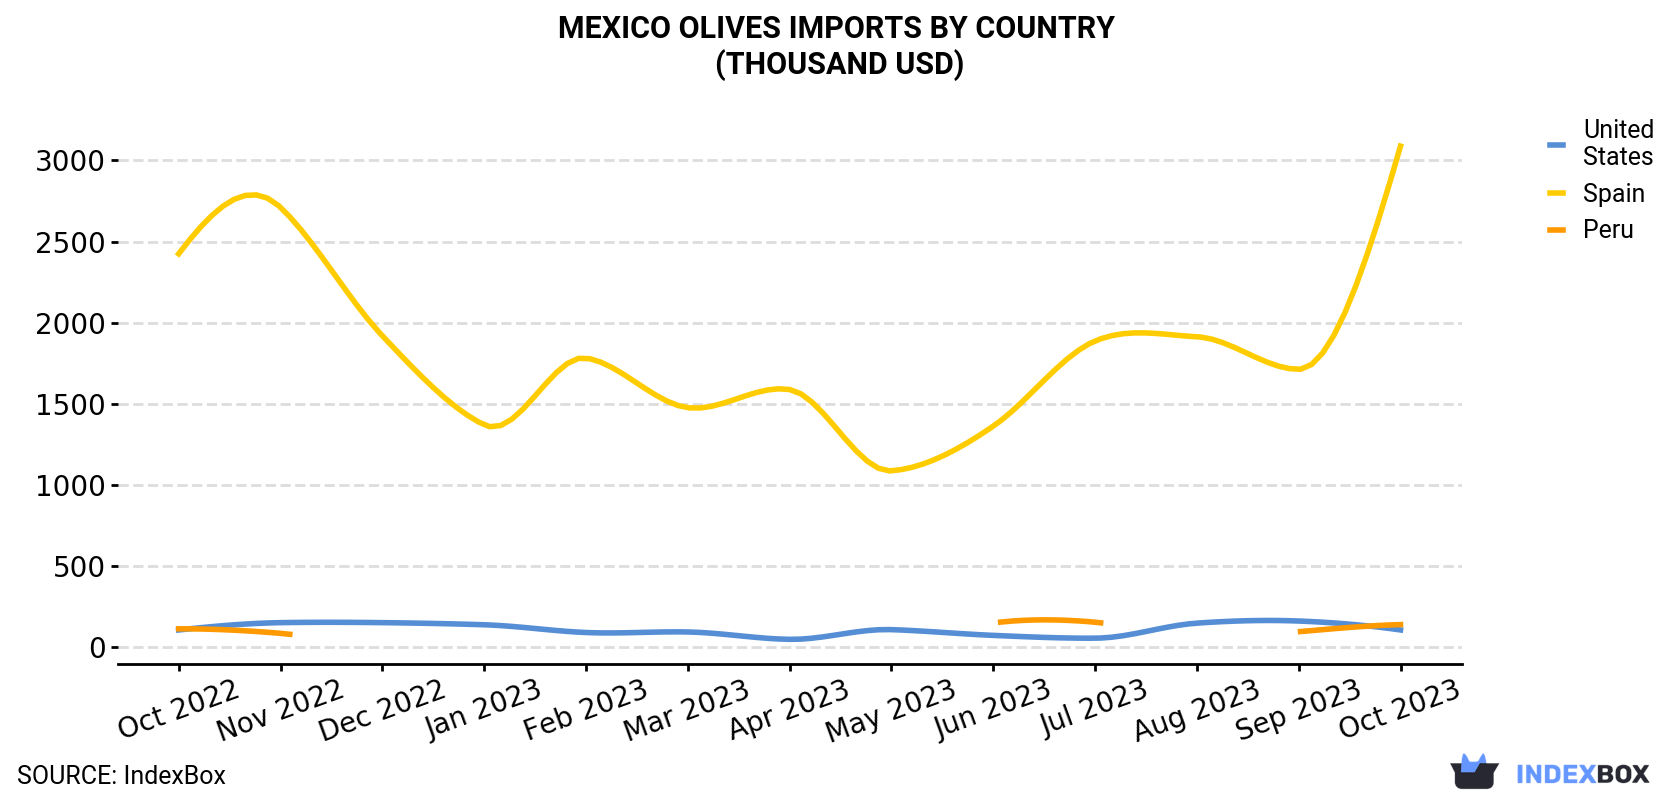 Mexico Olives Imports By Country (Thousand USD)